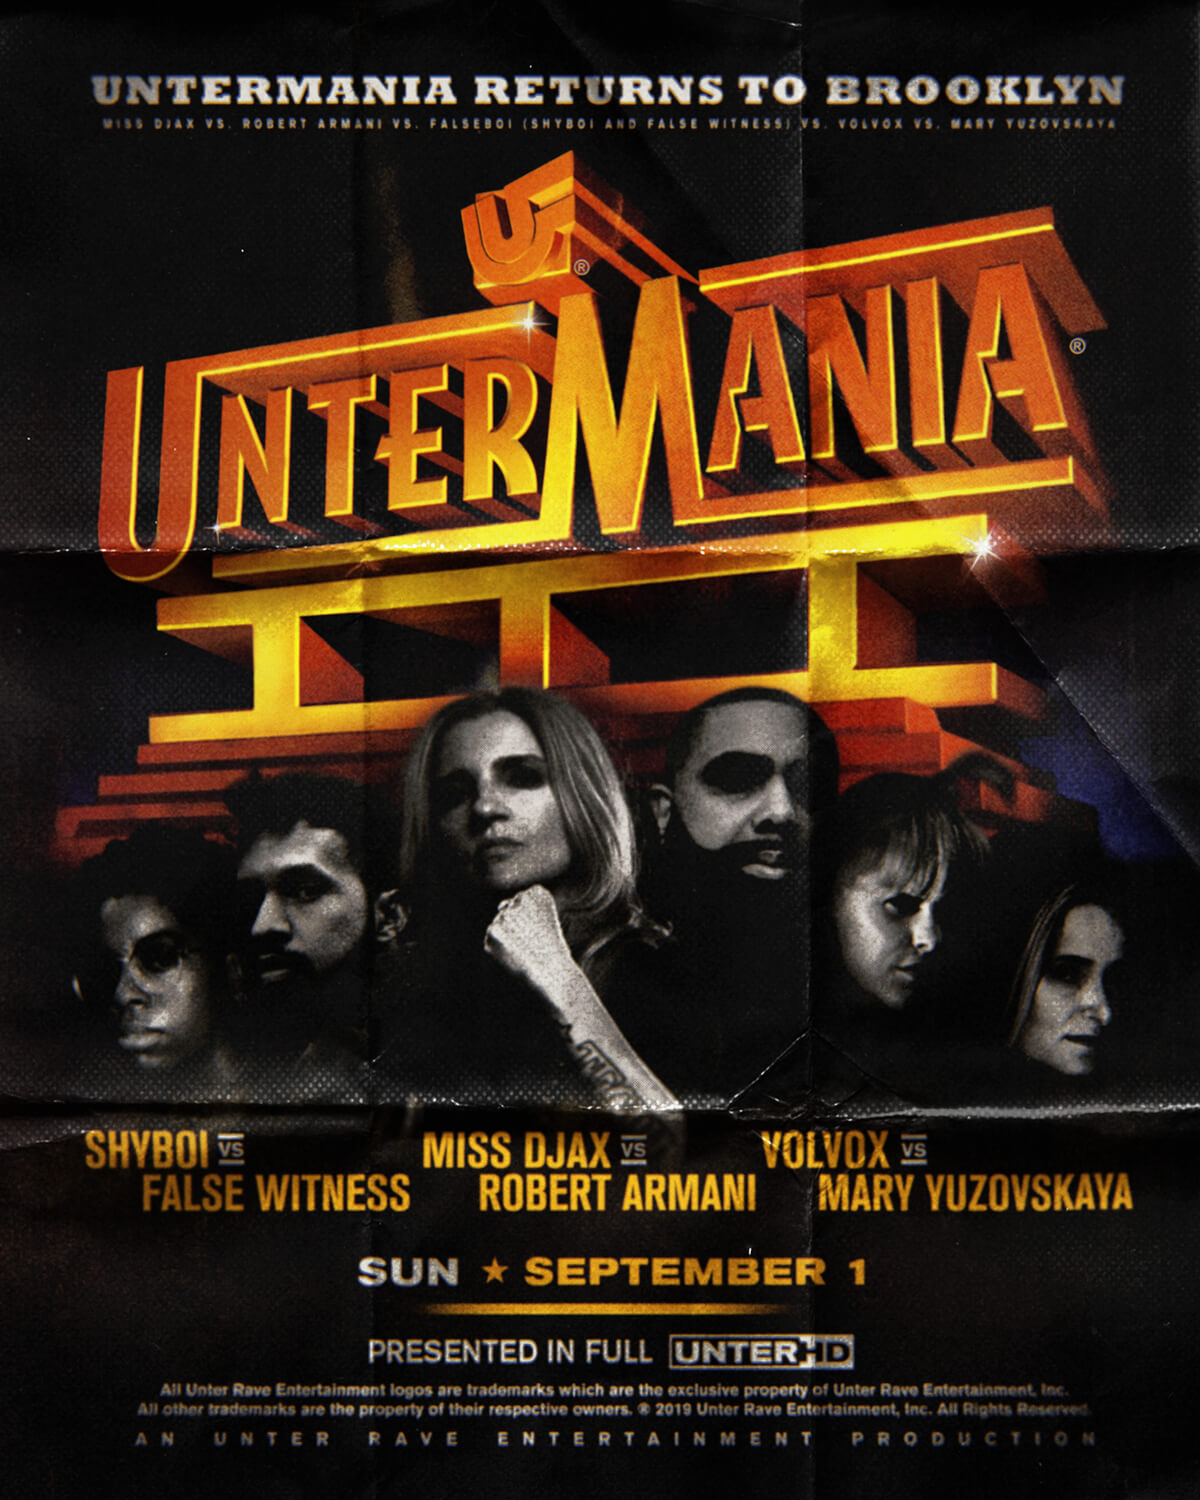 Poster for Unter Mania III